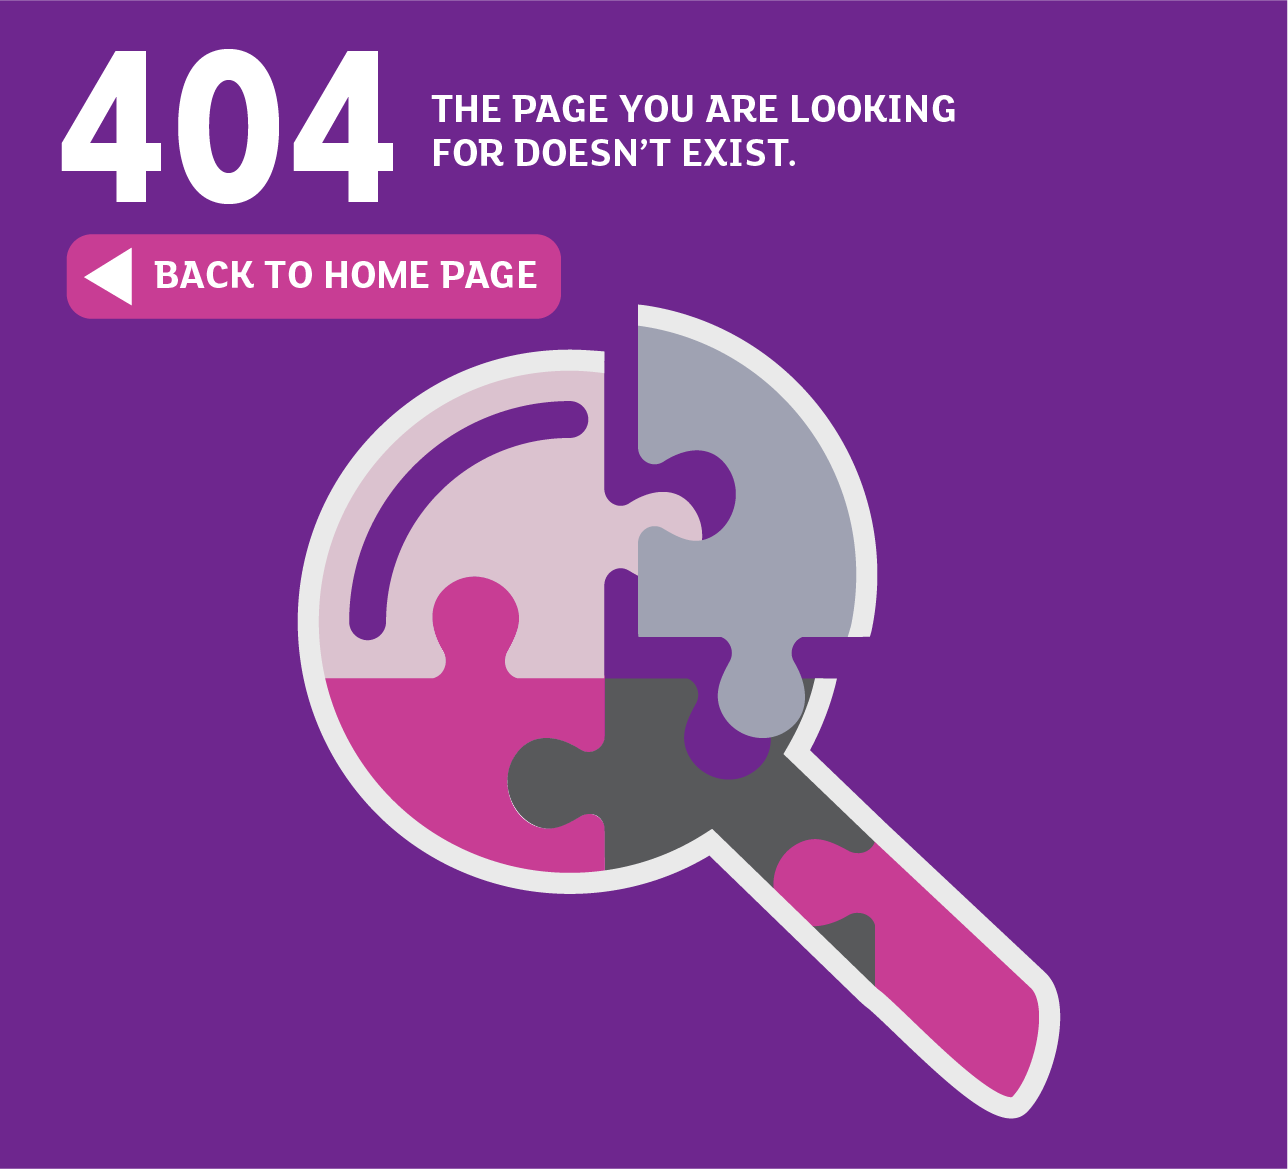 404 - the page you are looking for doesn't exist